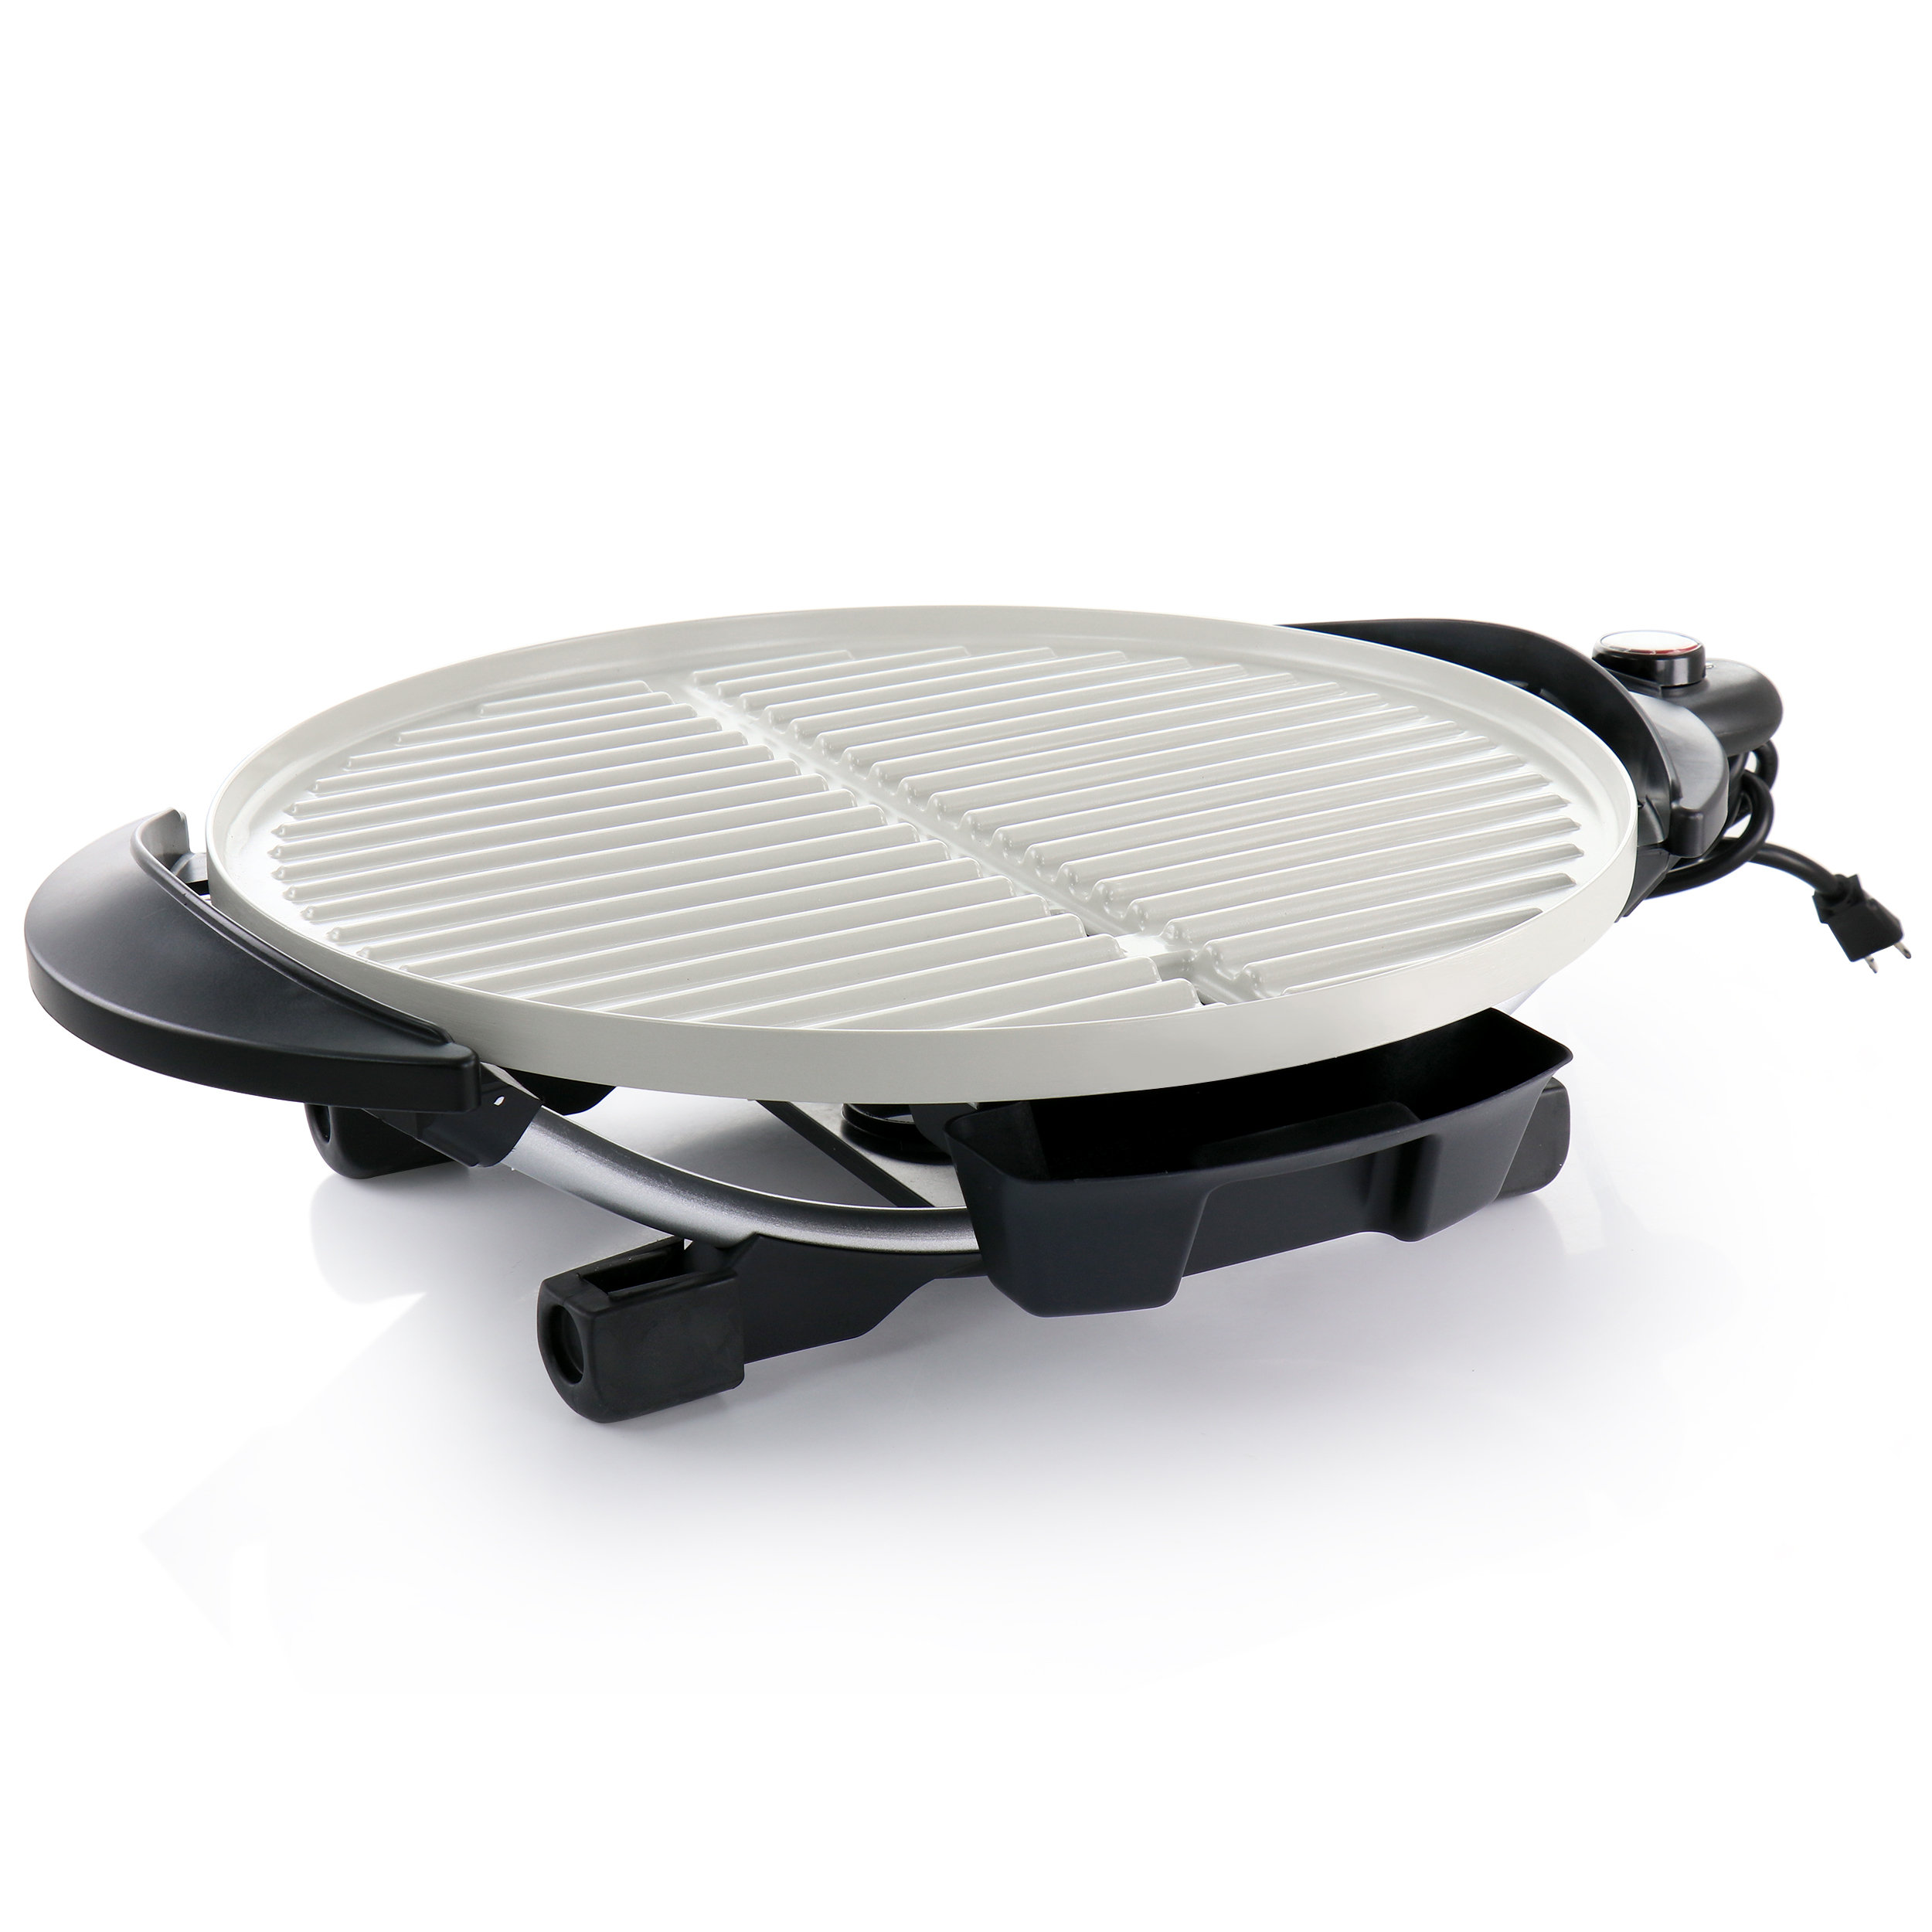 George Foreman Indoor/Outdoor Electric Grill, 15-Serving, black